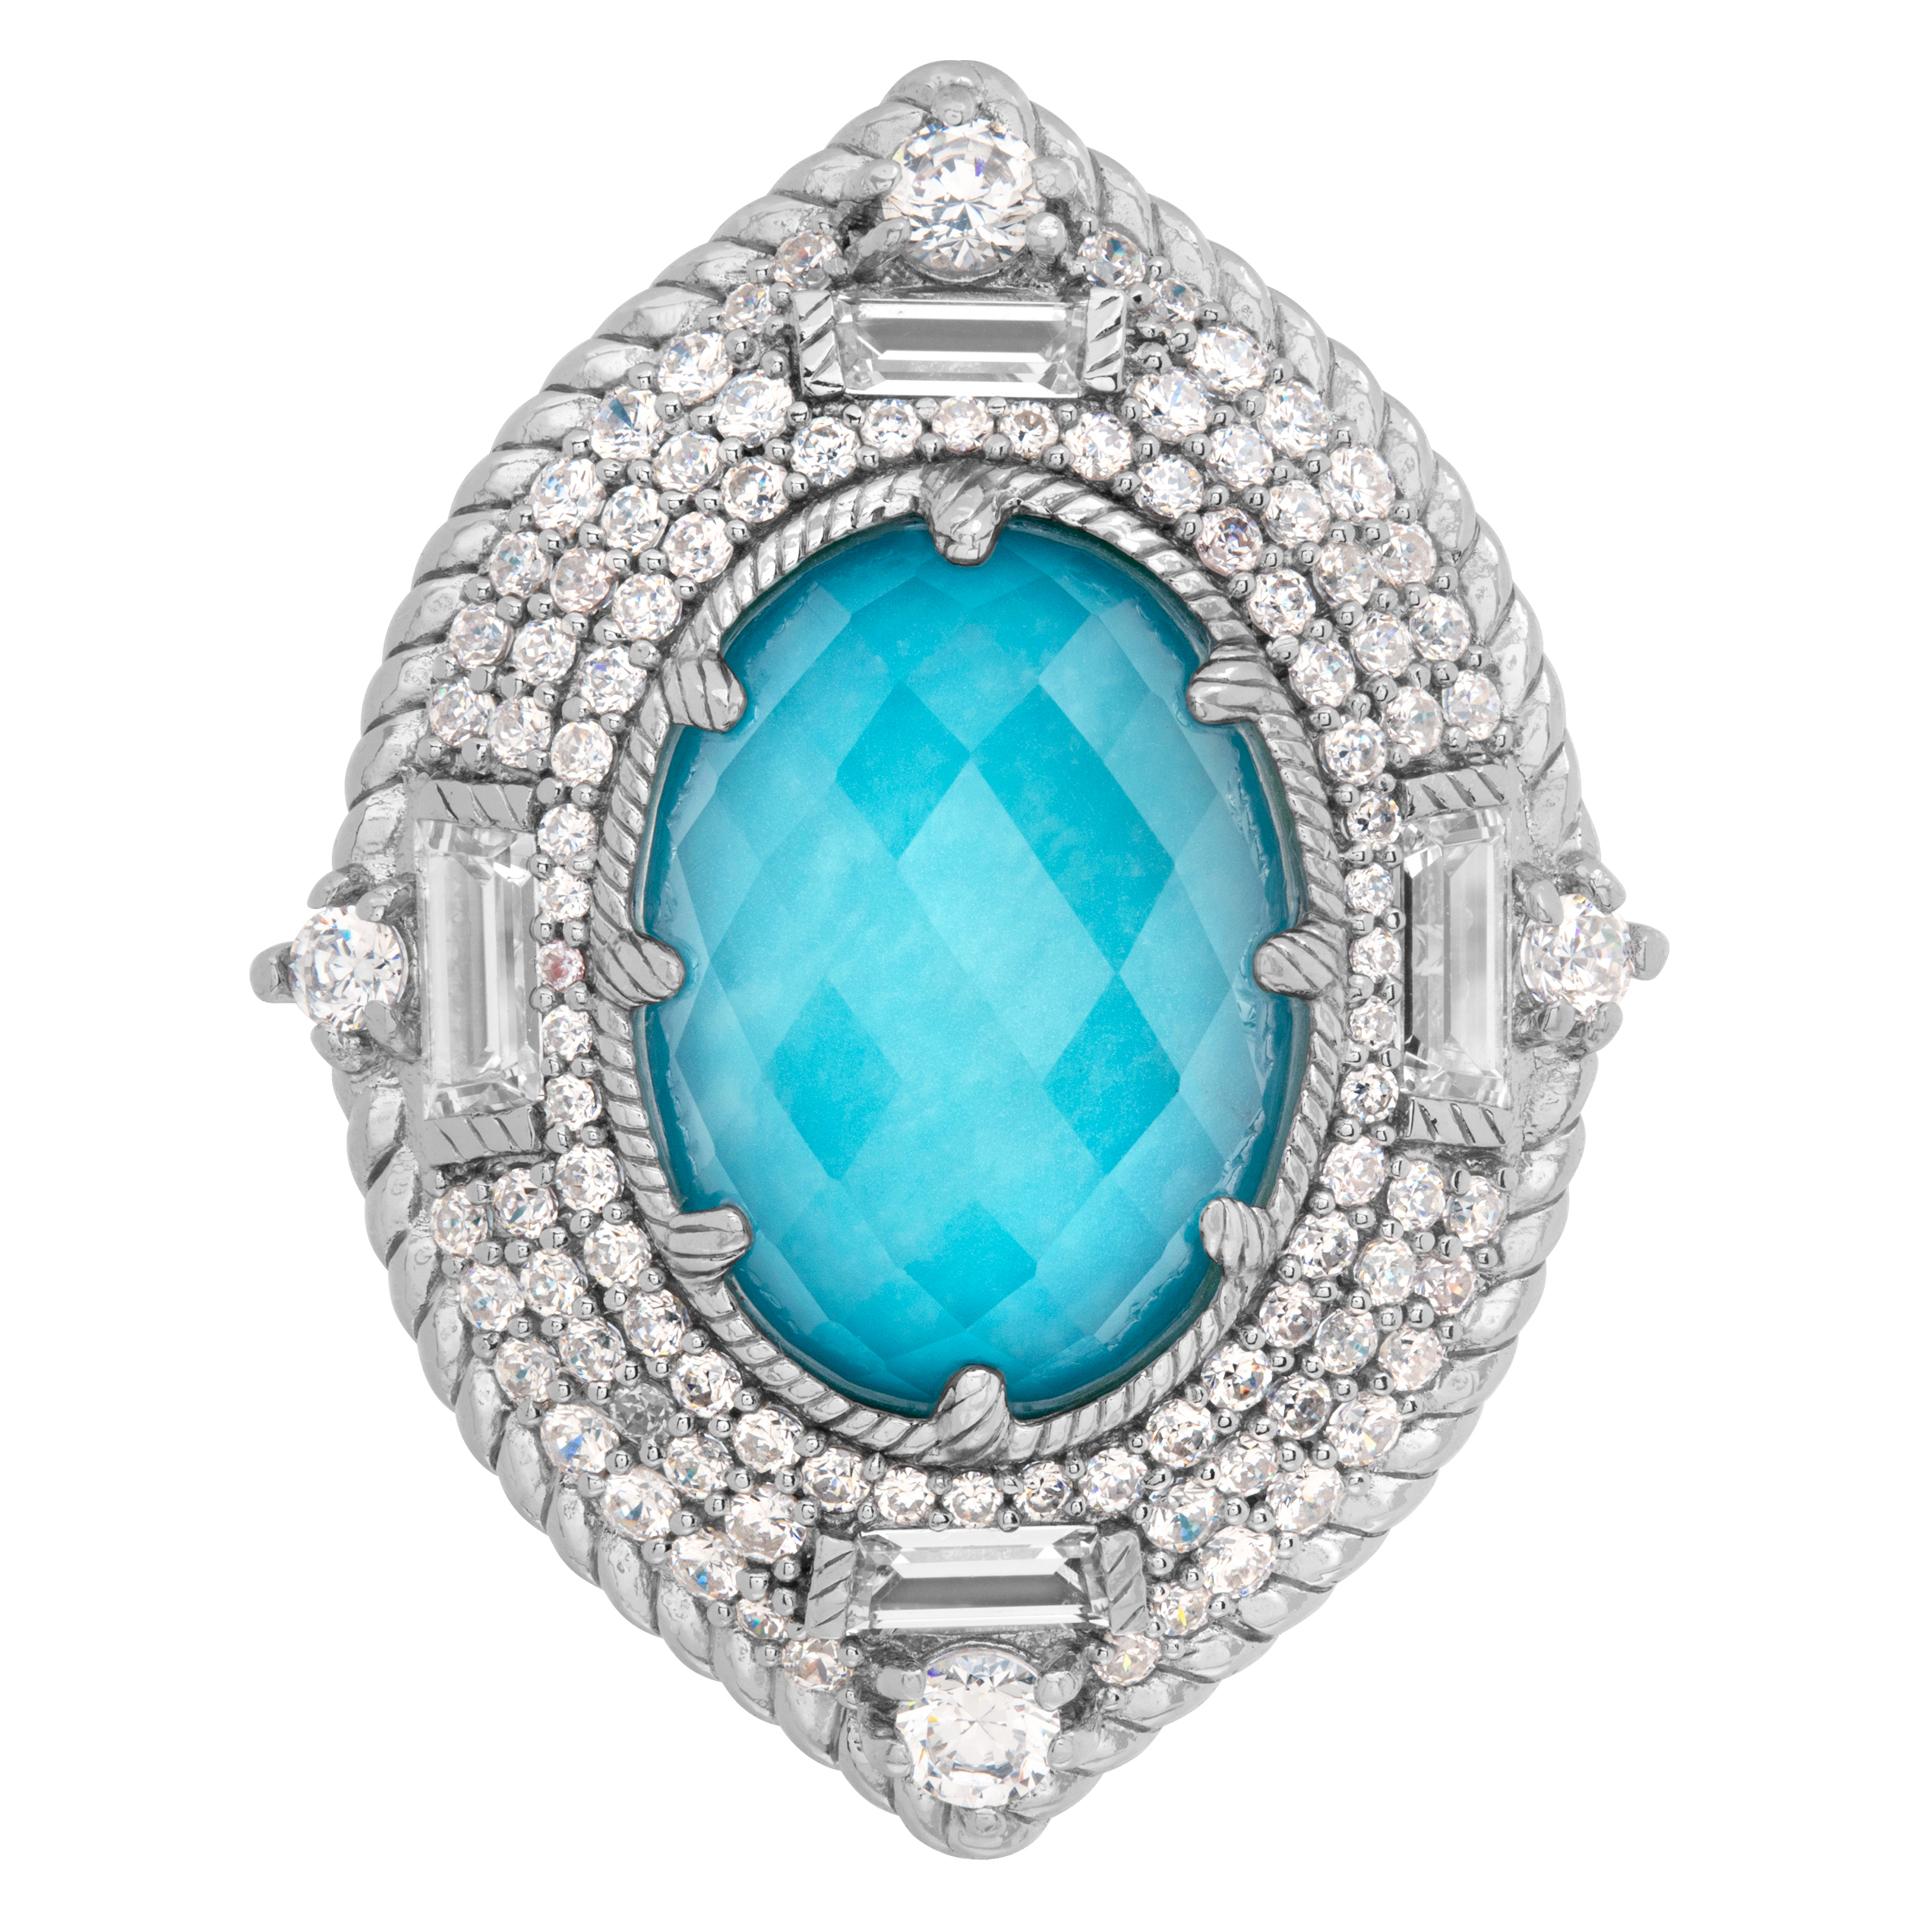 Judith Ripka ring with faceted blue topaz and cz white stones in sterling silver. Size 7, measures 32mm x 25mm at head, 3mm shank.This Judith Ripka ring is currently size 7 and some items can be sized up or down, please ask! It weighs 10.9